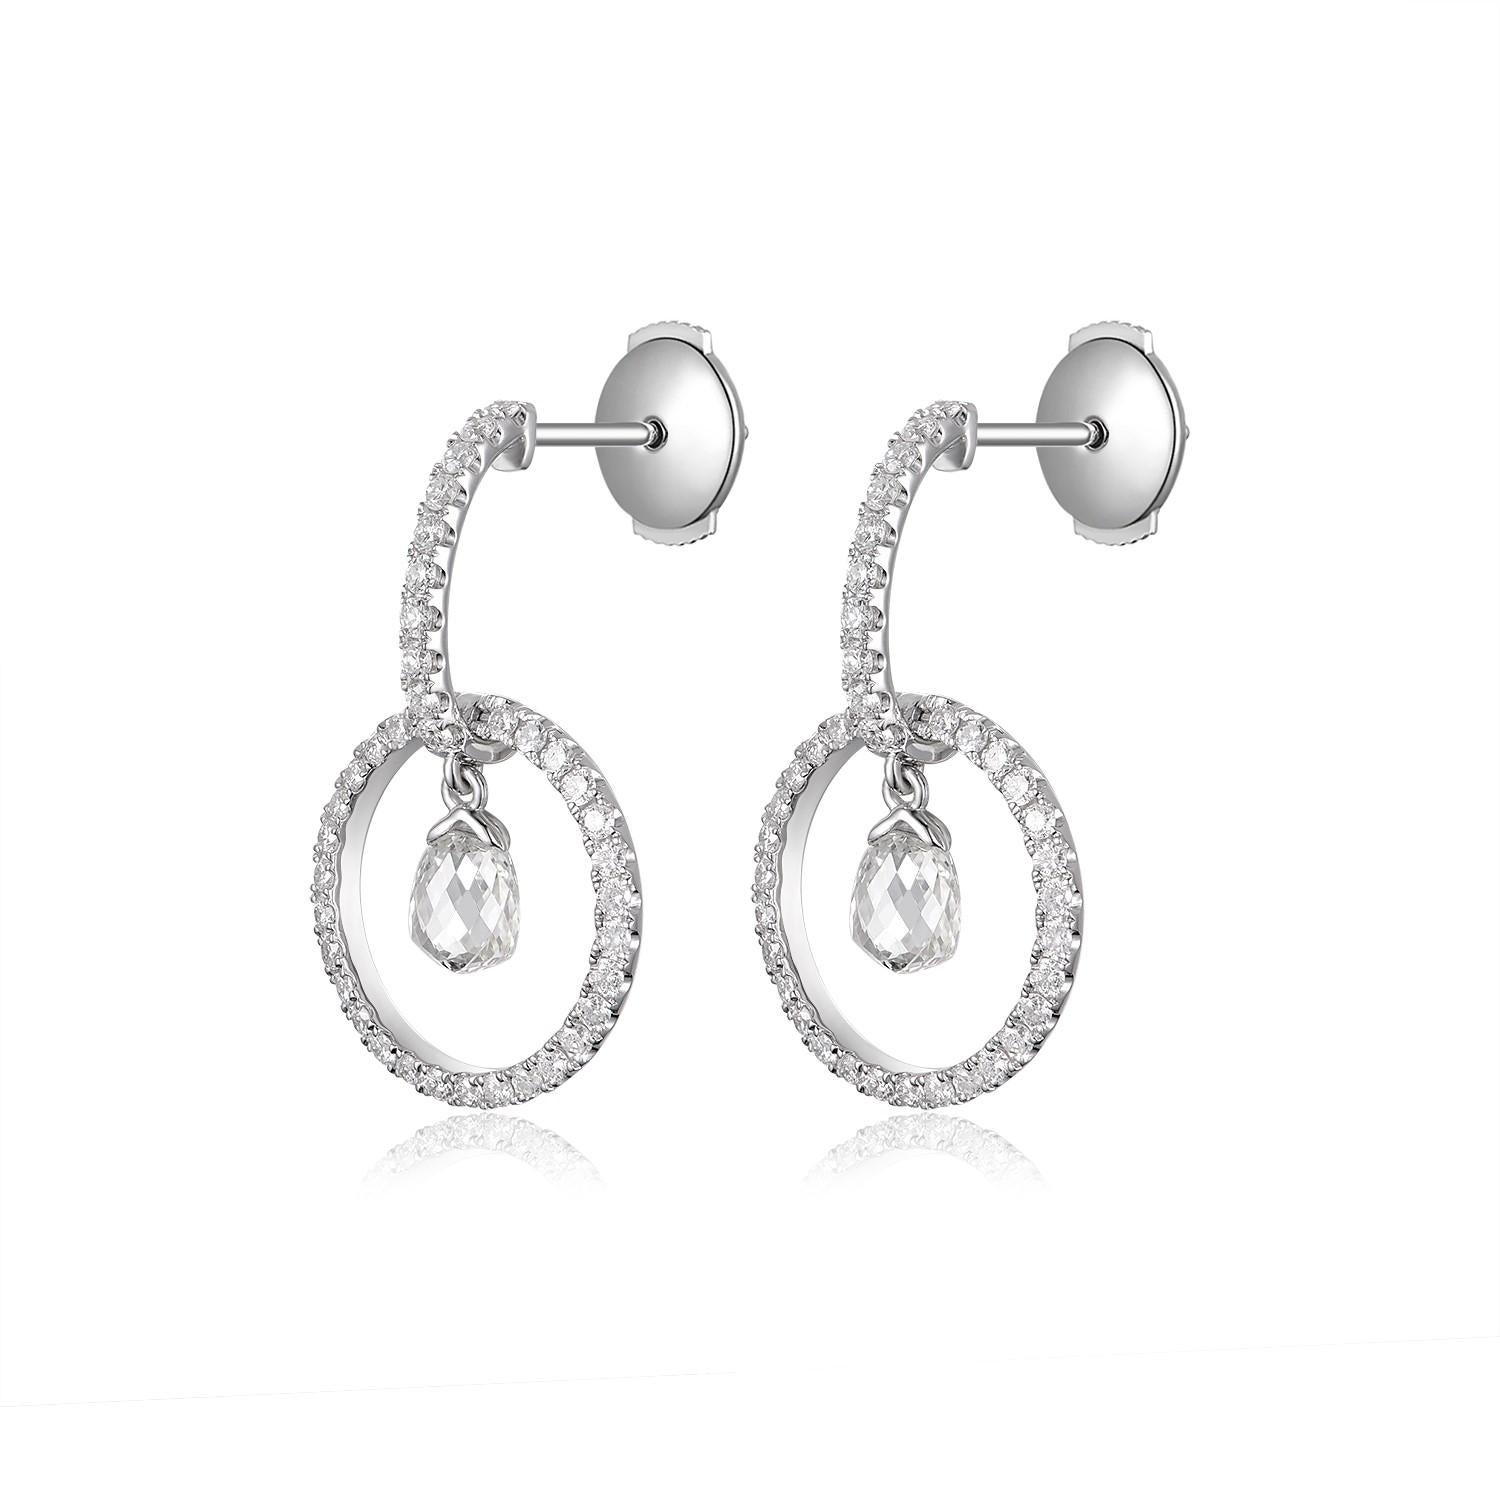 Illuminate your presence with these exquisite Vintage Diamond Briolette Dangle Earrings, a timeless piece reflecting elegance and sophistication. The luxurious drop design of these earrings makes them a captivating addition to any jewelry